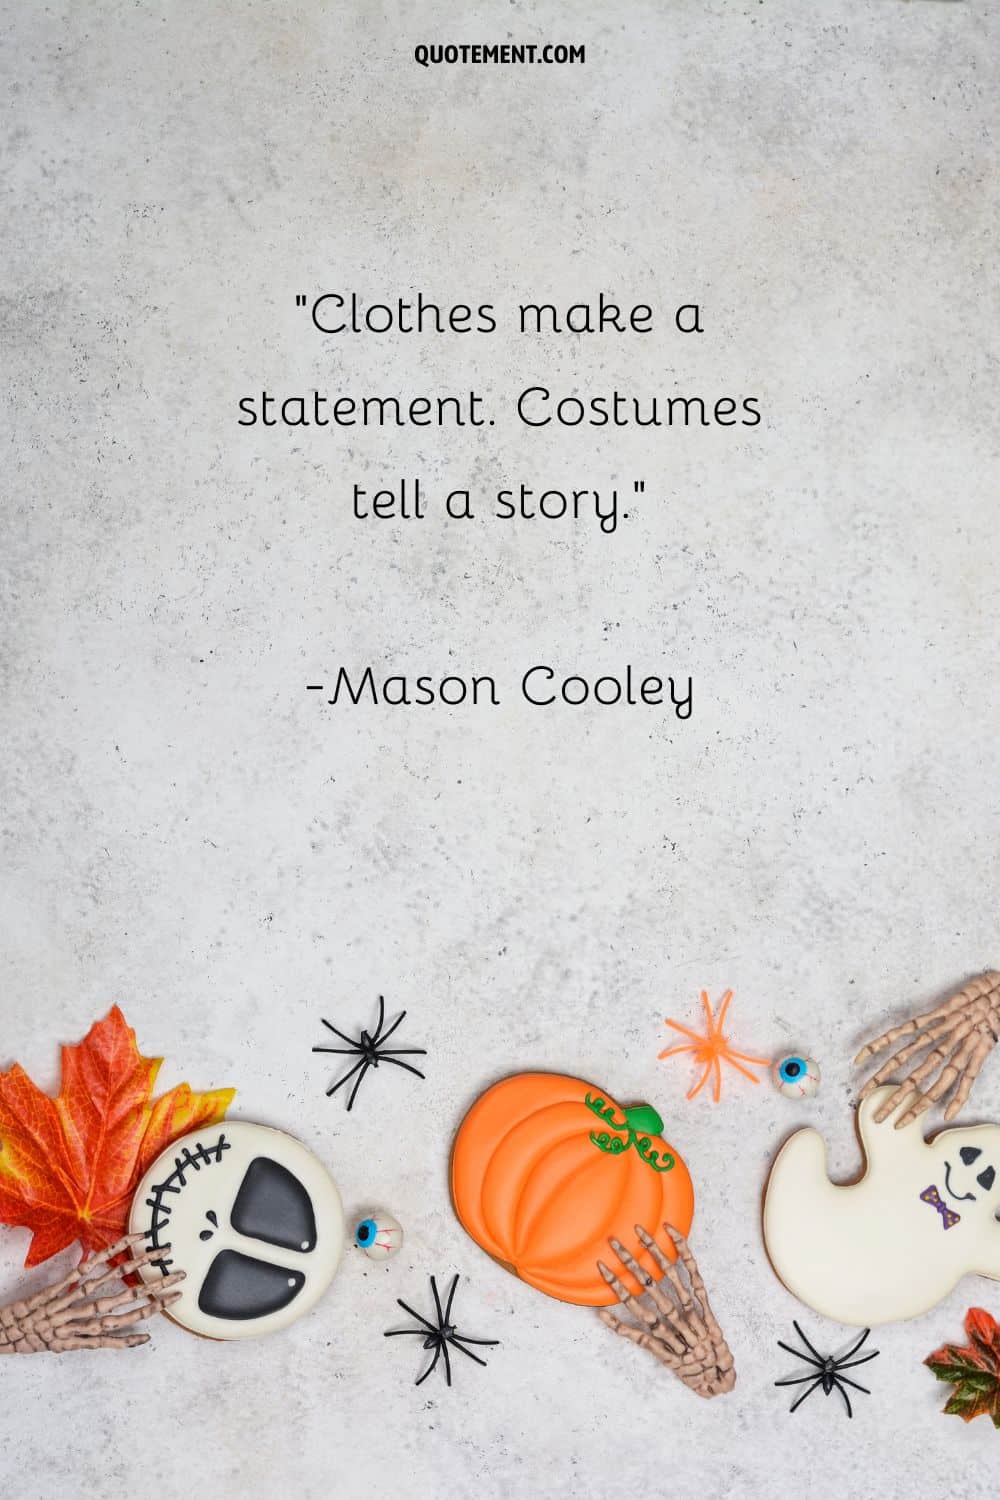 Clothes make a statement. Costumes tell a story